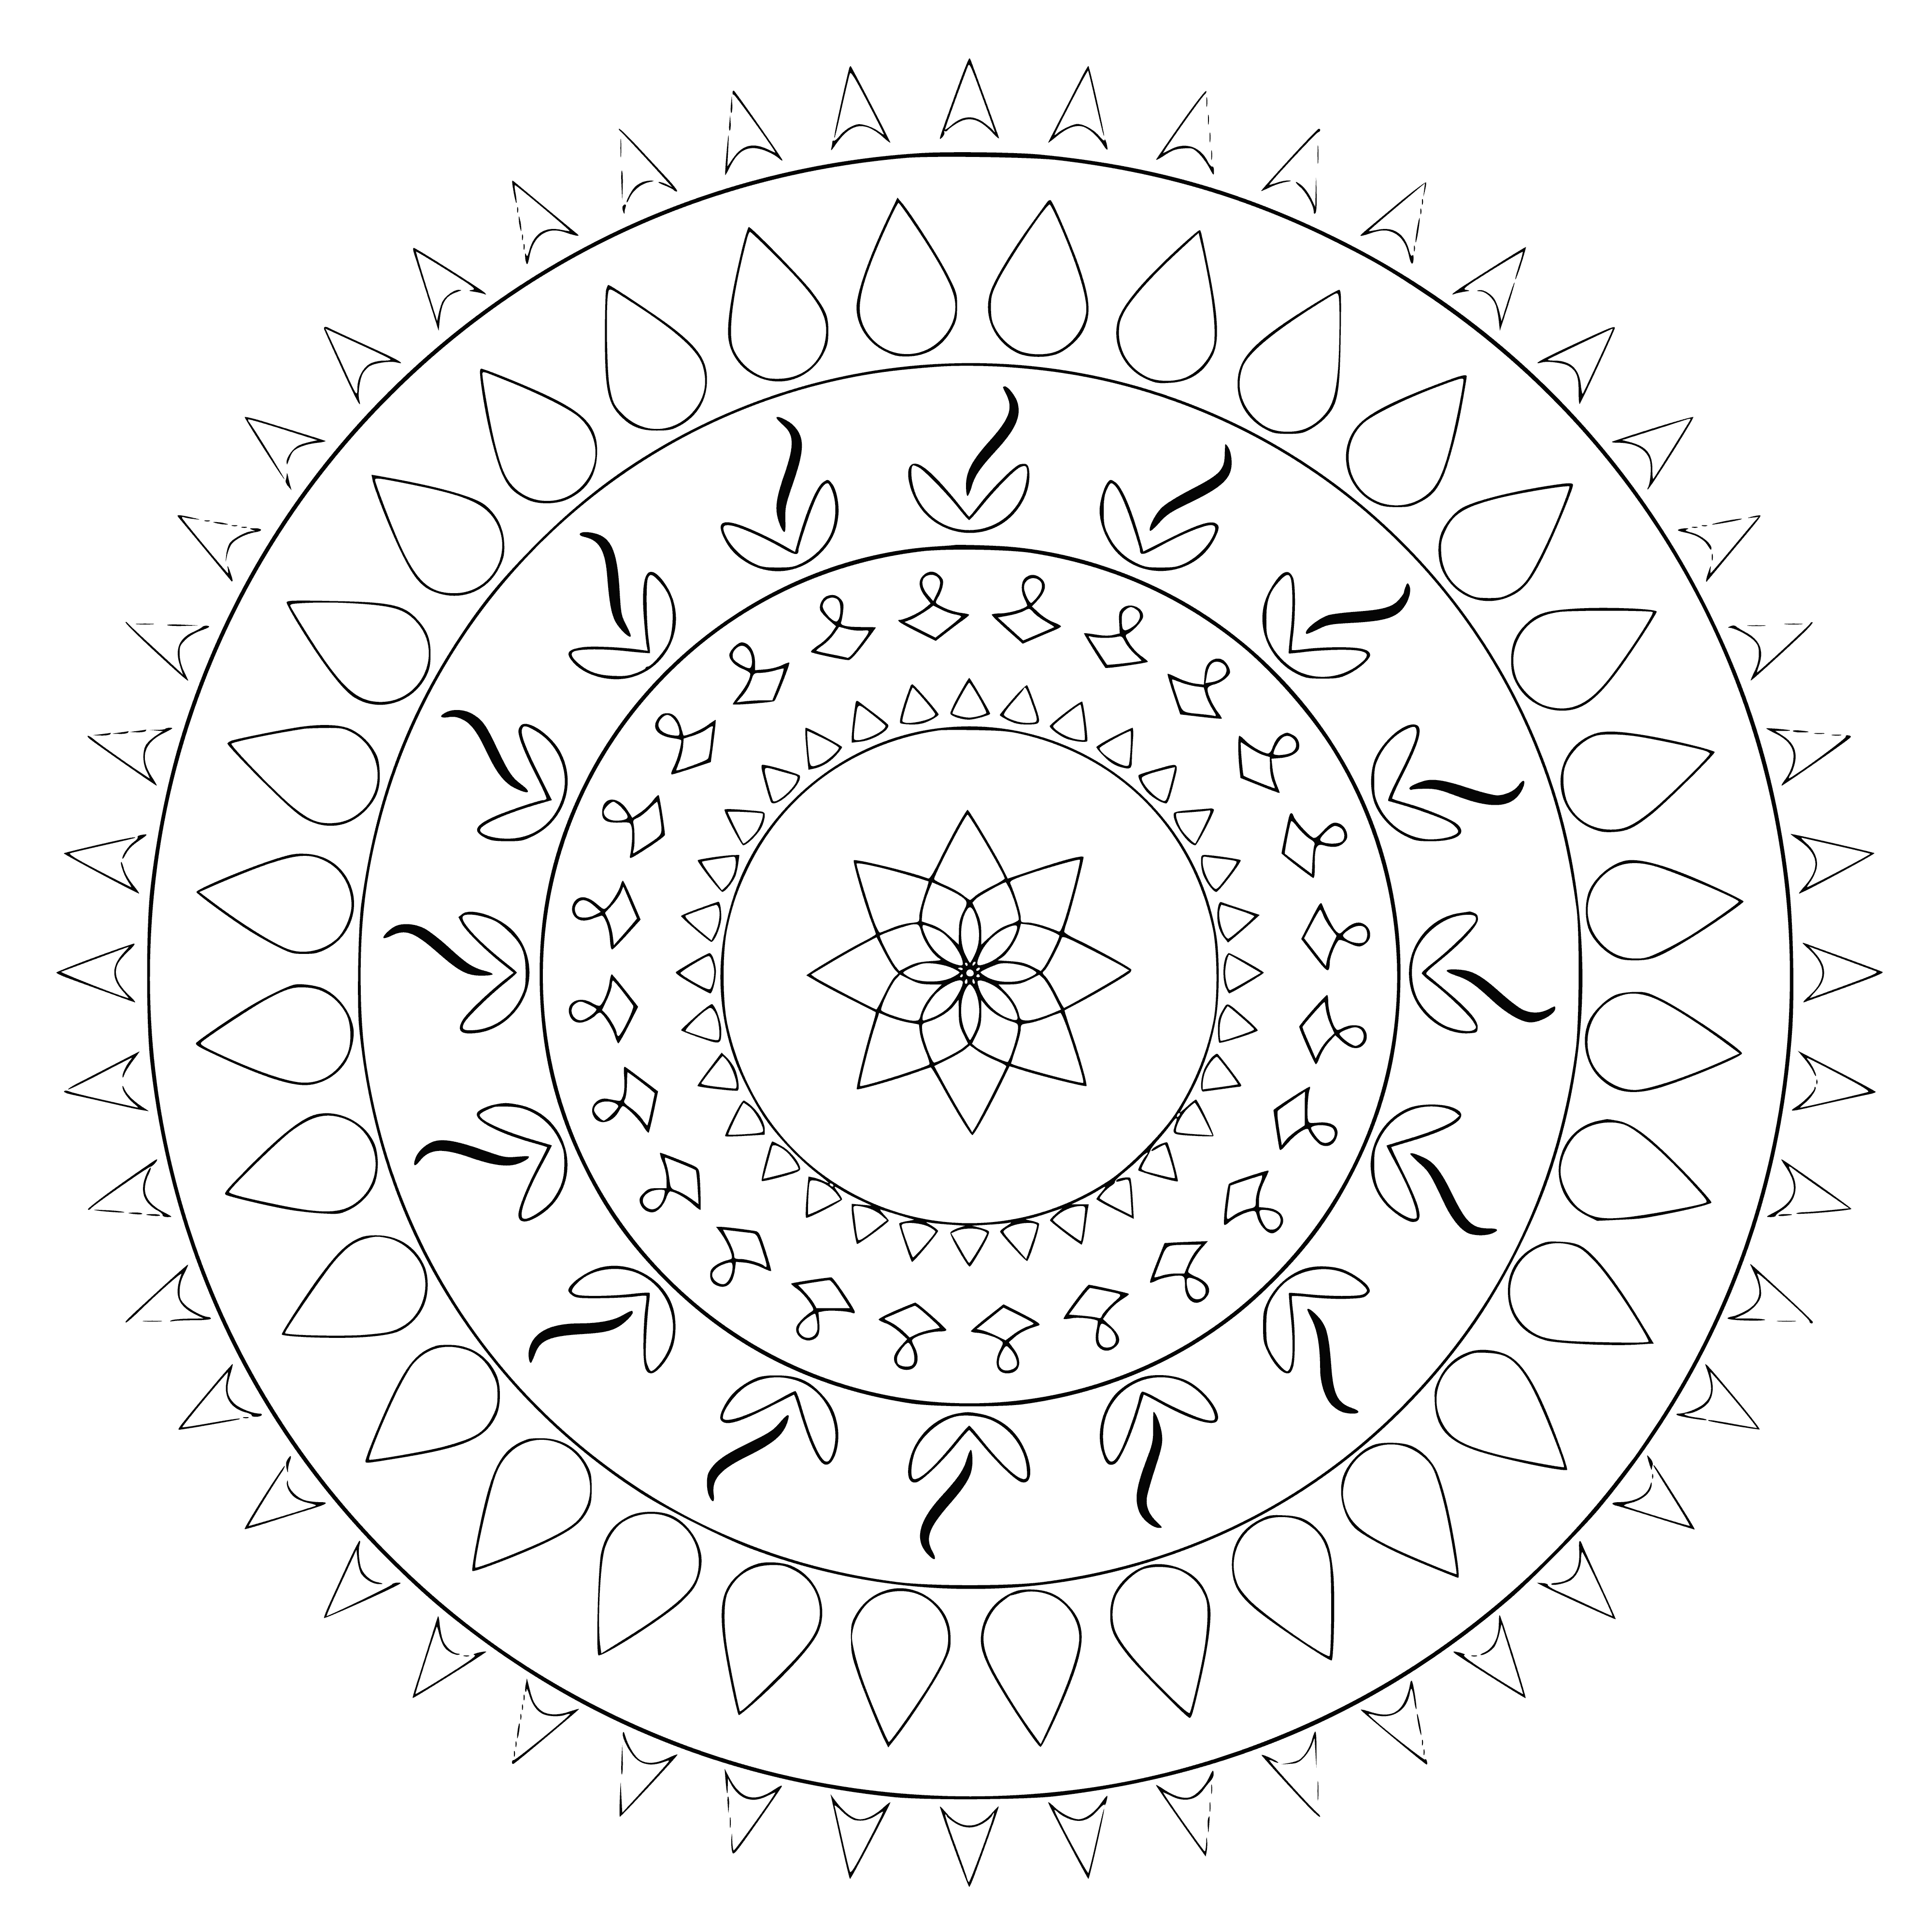 coloring page: Mandala coloring page has central circle surrounded by smaller circles connected by lines, creating patterns of harmony & balance. #coloring #mandalas